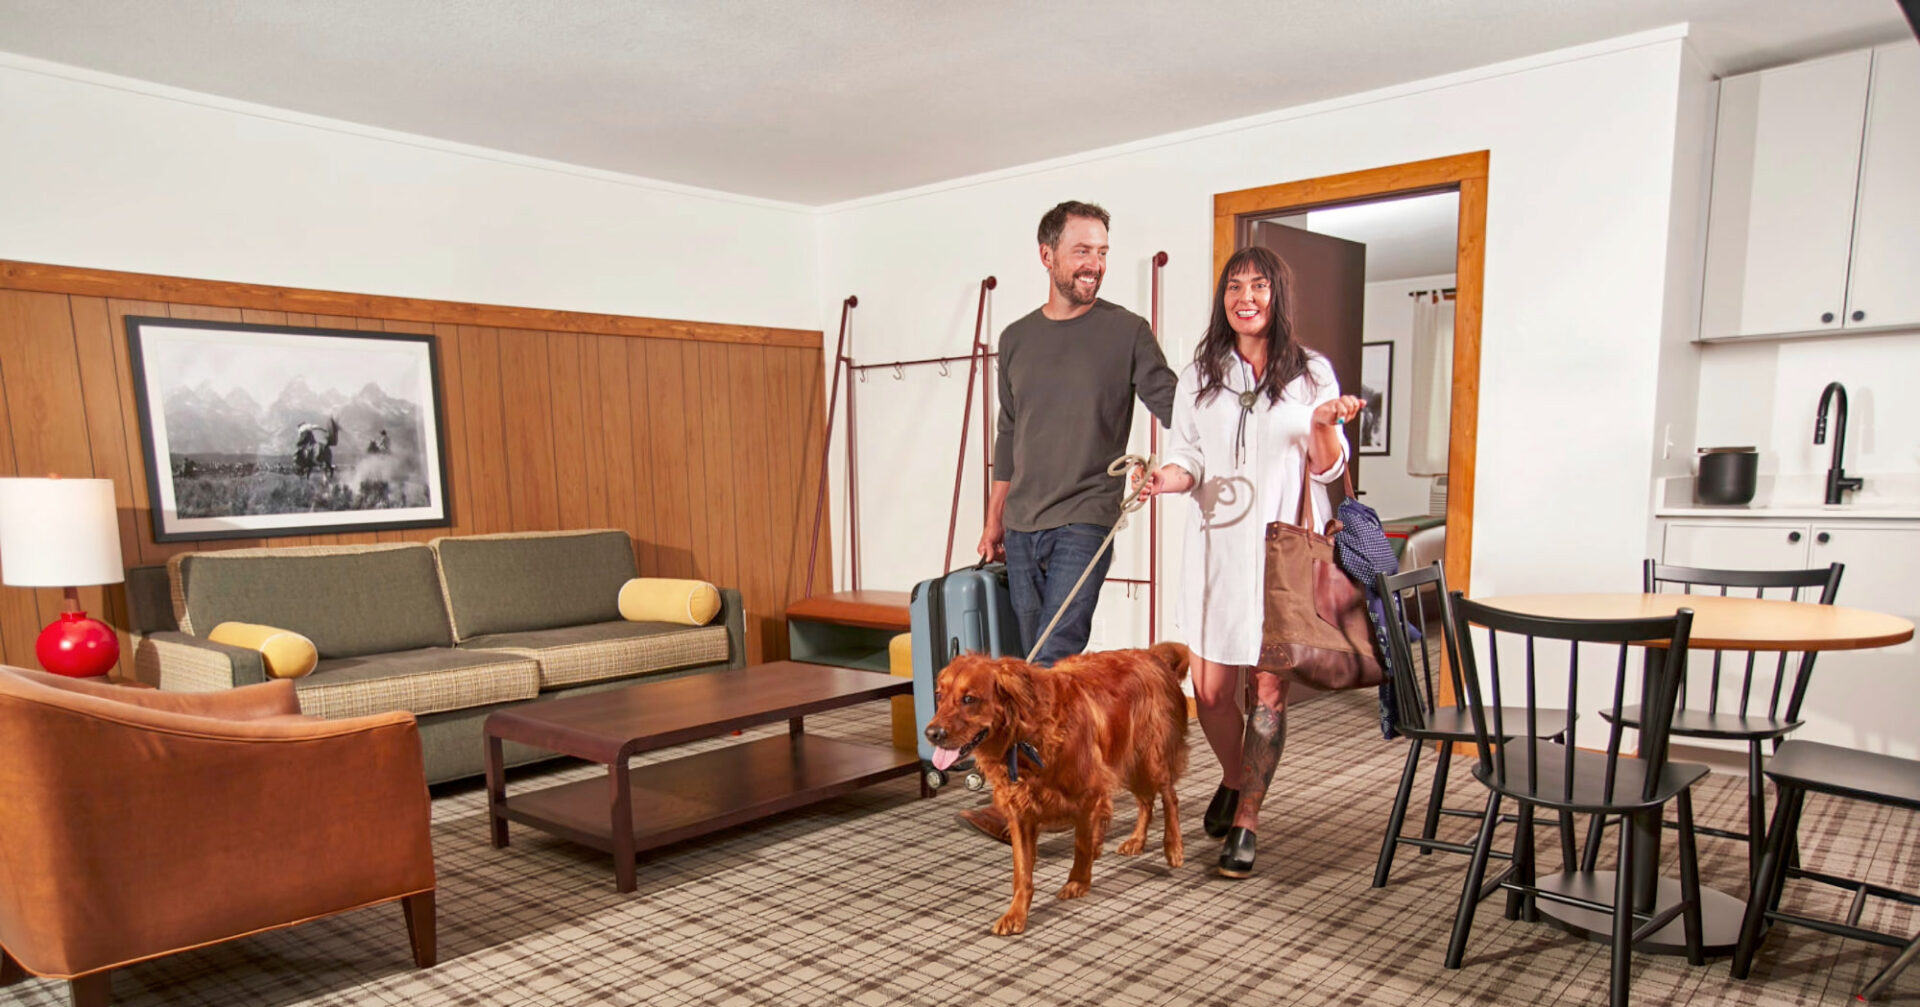 The couple enters a well-organized living space with luggage and pet, setting a welcoming tone.